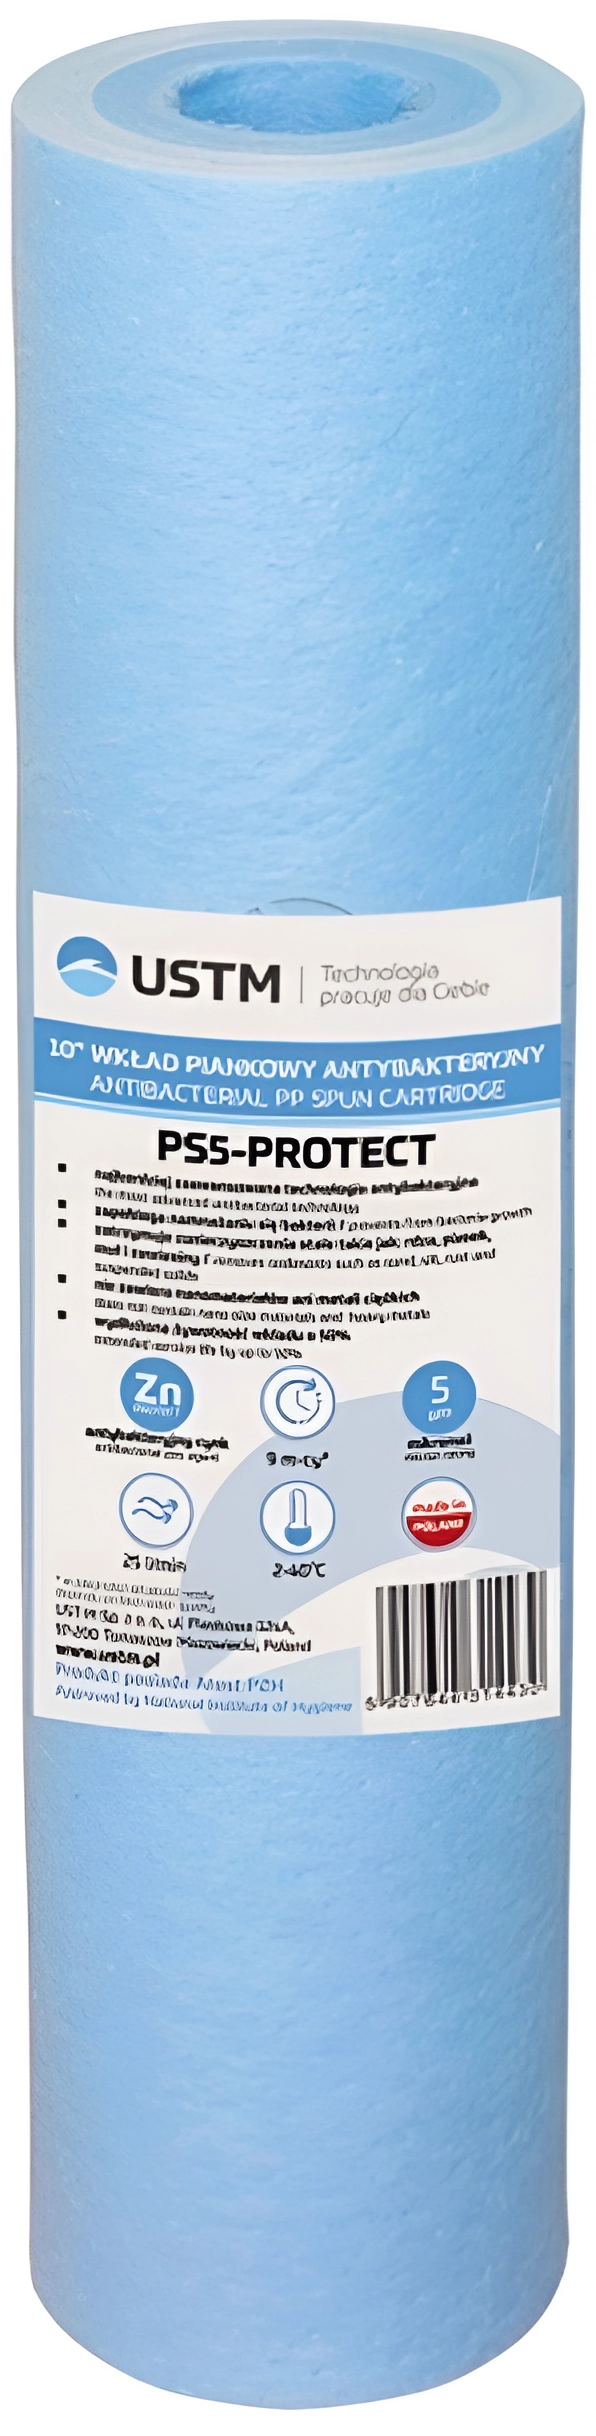 USTM PS-5-Protect 10"